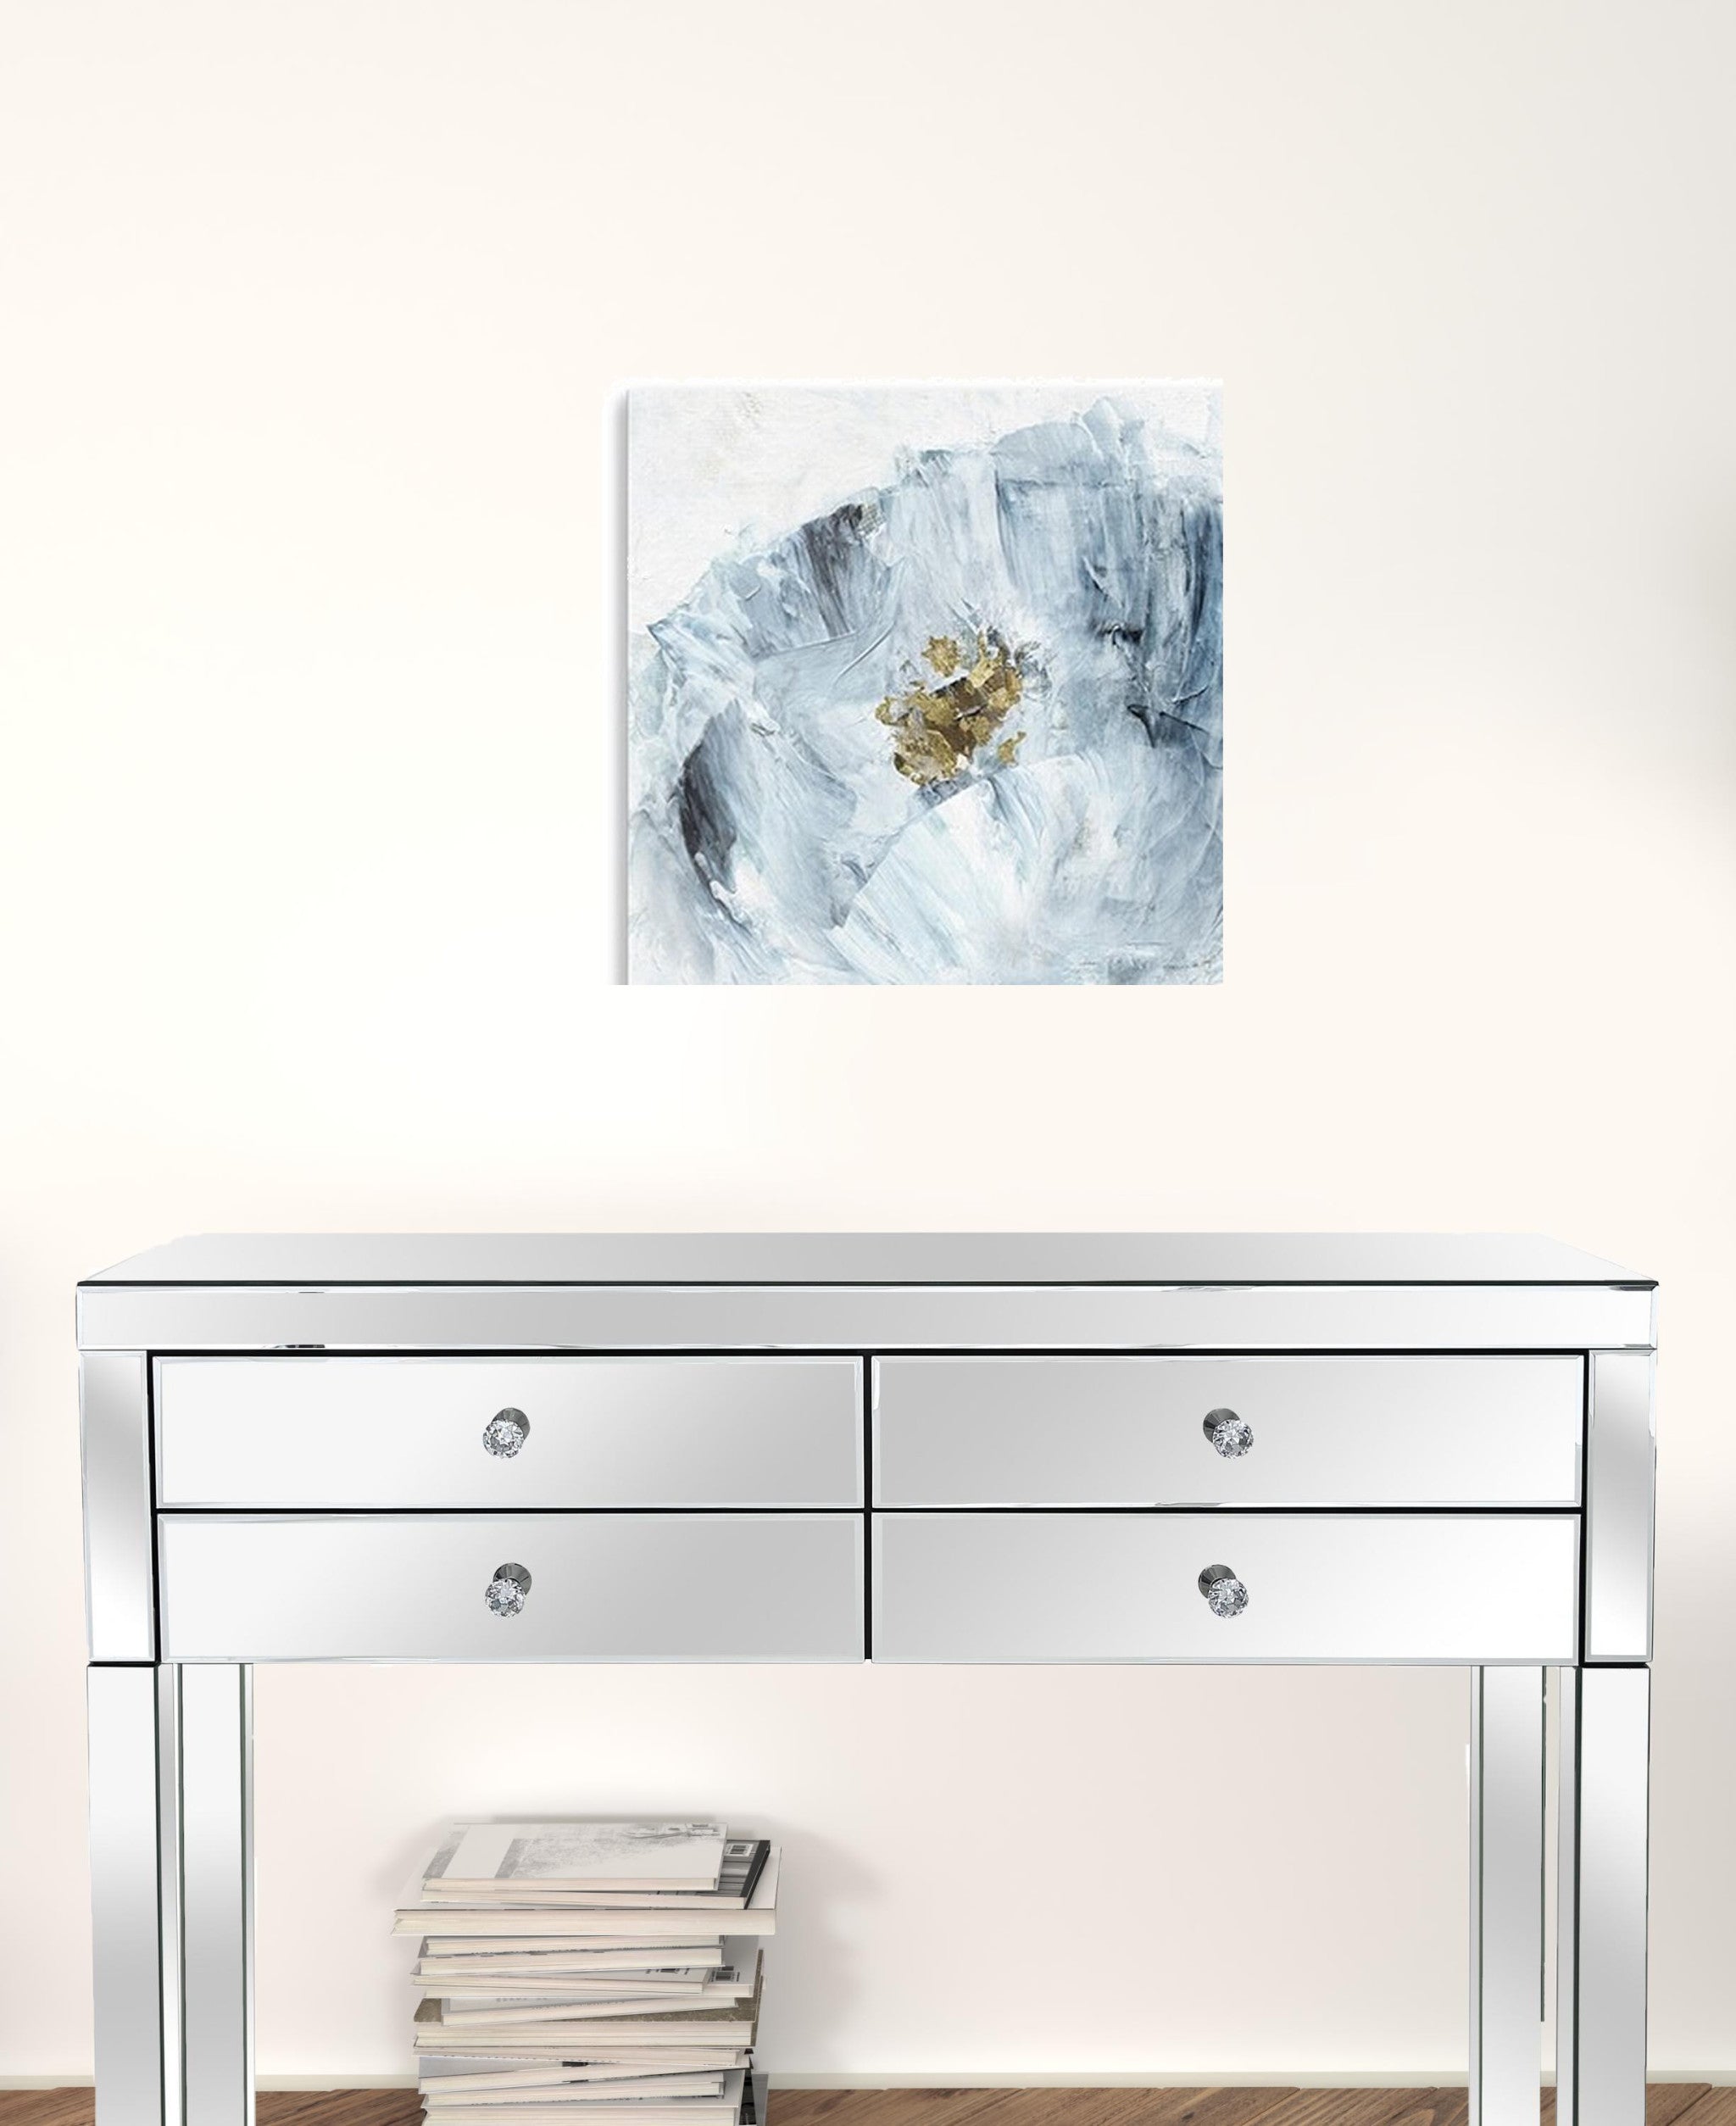 20" x 20" Watercolor Abstract Gray Blue Flower II Canvas Wall Art